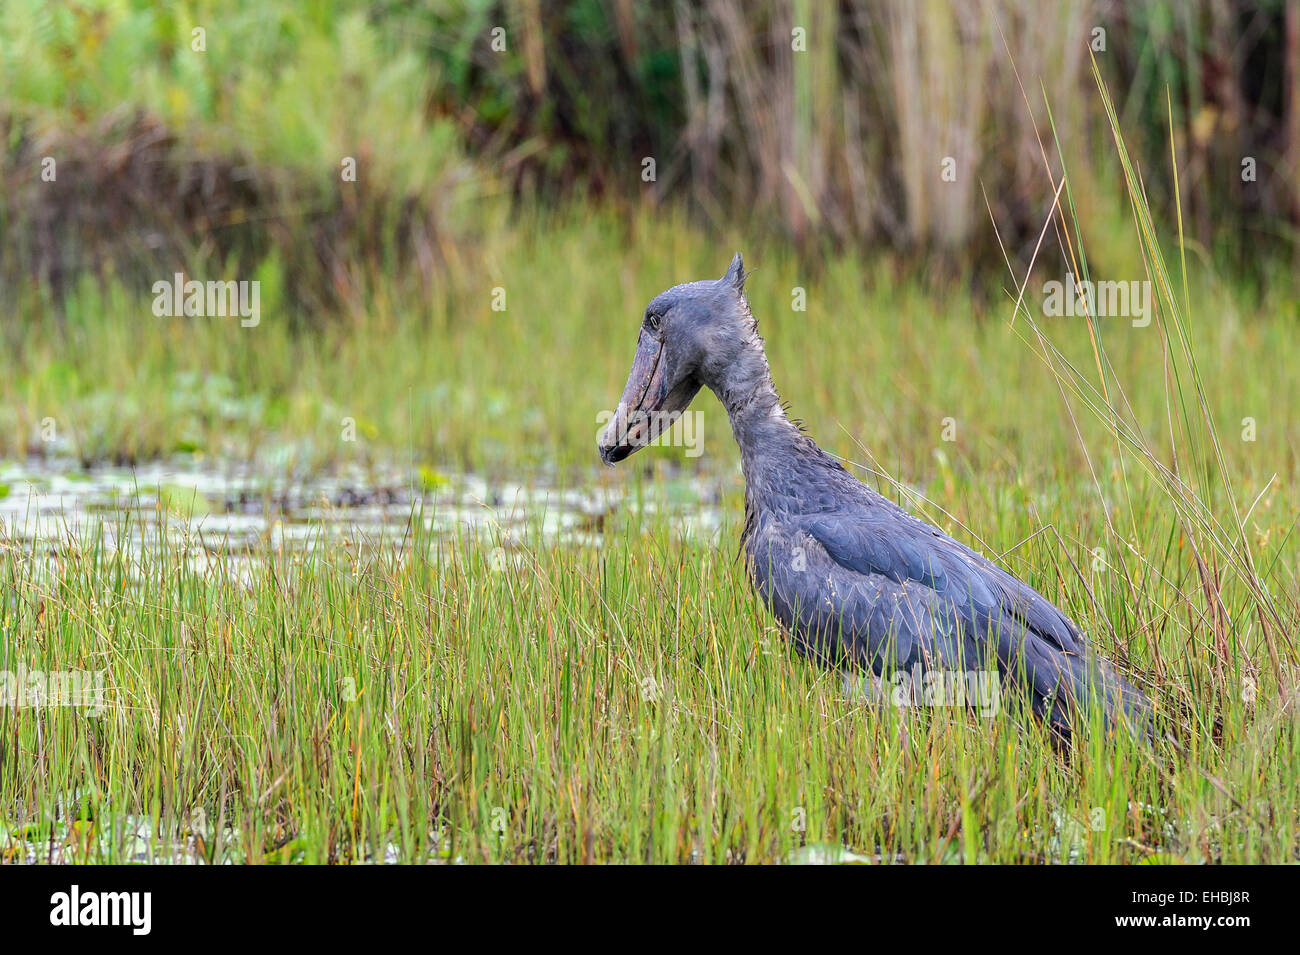 A shoebill, whalehead or shoe-billed stork stood absolutely still in Mabamba Swamp, Uganda. Horizontal format with copyspace. Stock Photo